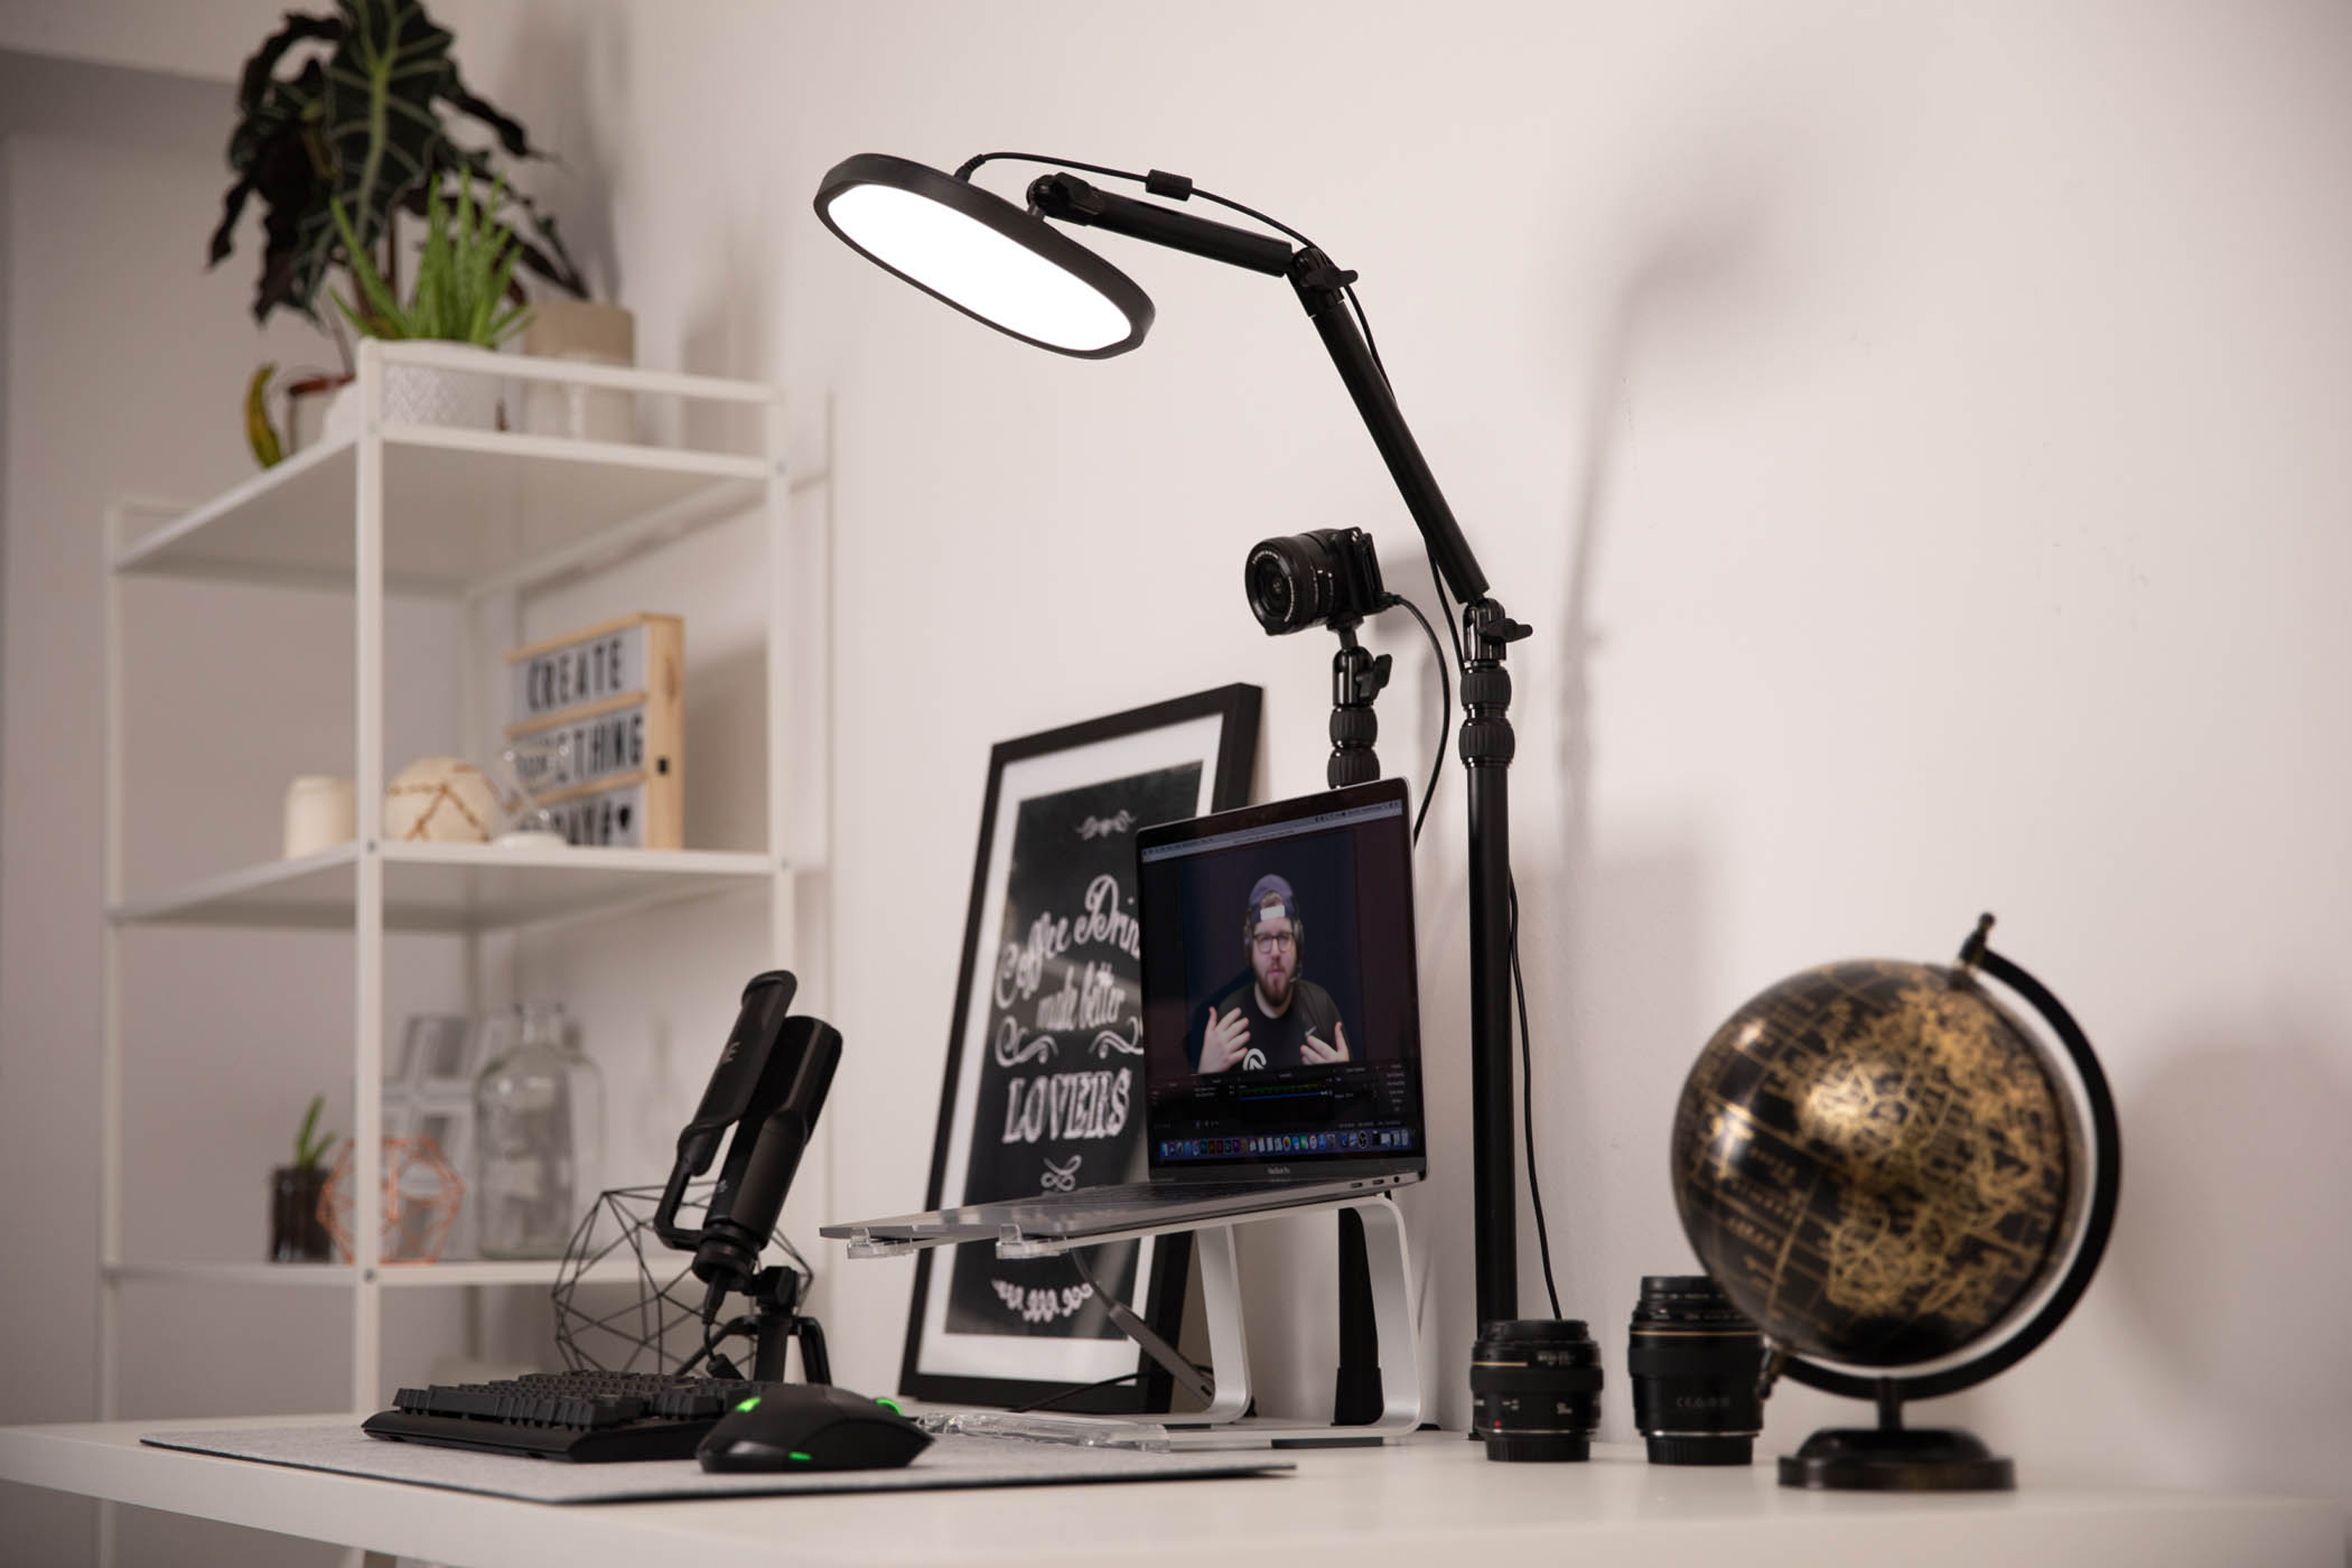 Elgato on X: Key Light Air works with Multi Mount to get that perfect  angle.  / X